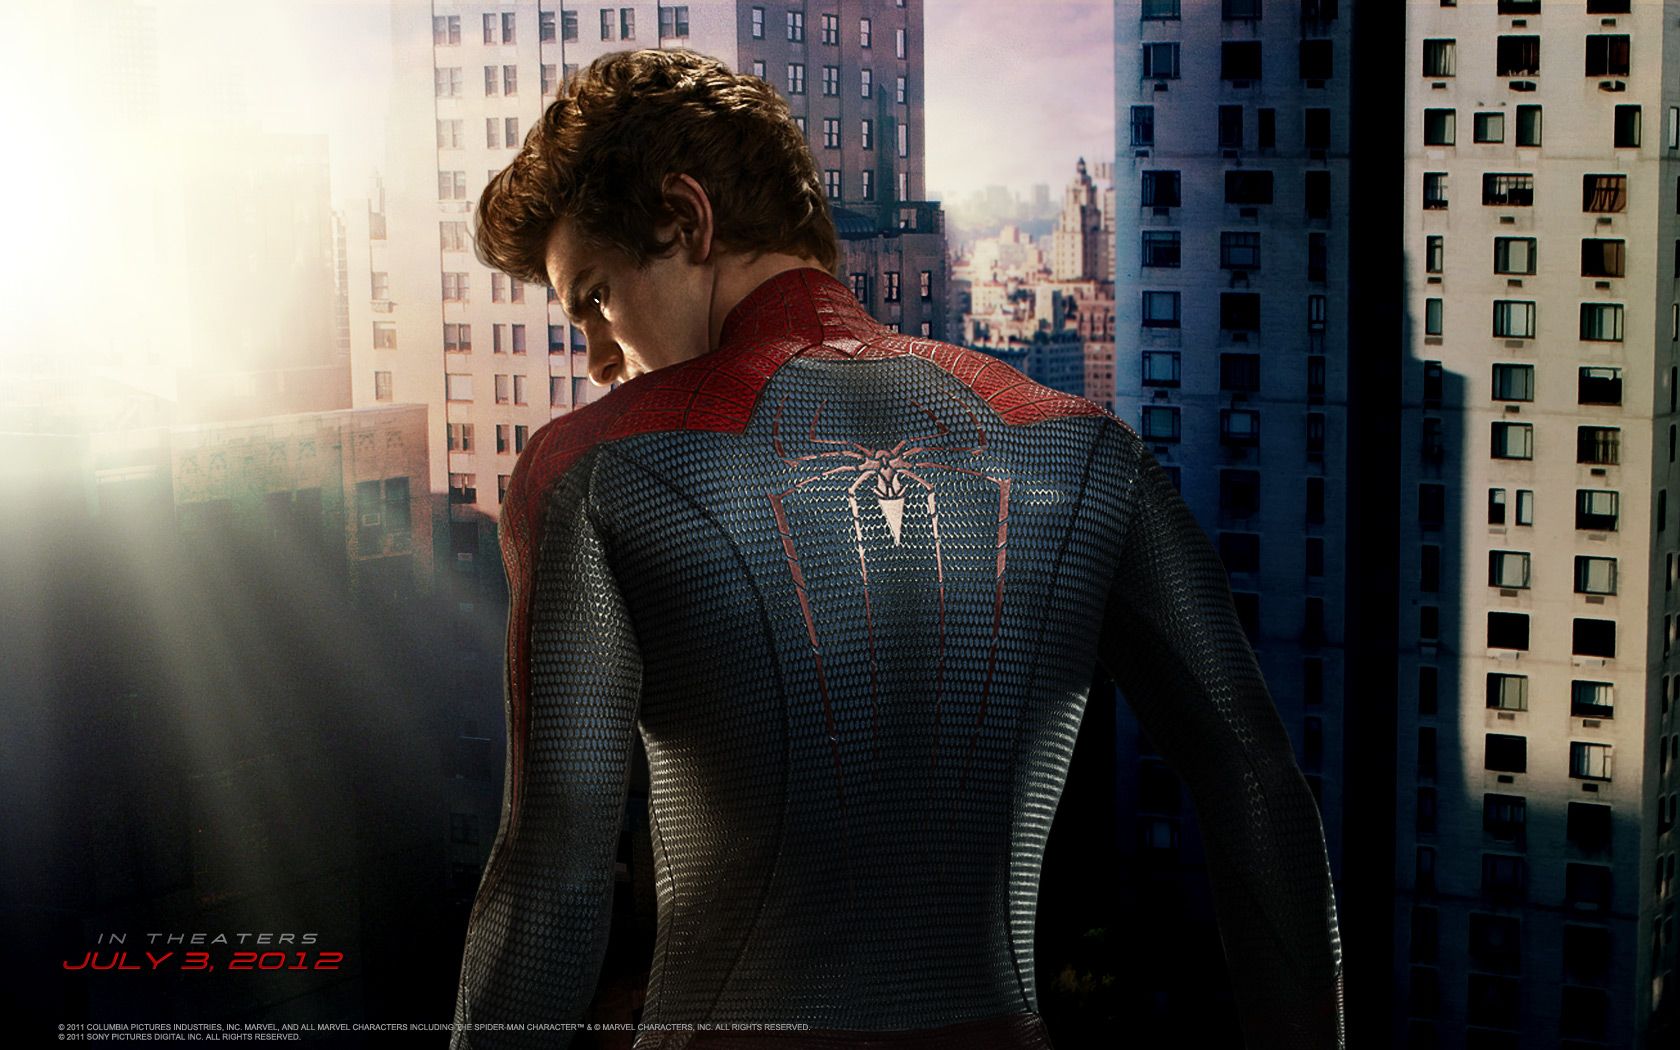 THE AMAZING SPIDER-MAN Movie Wallpapers and Character Bios | Collider